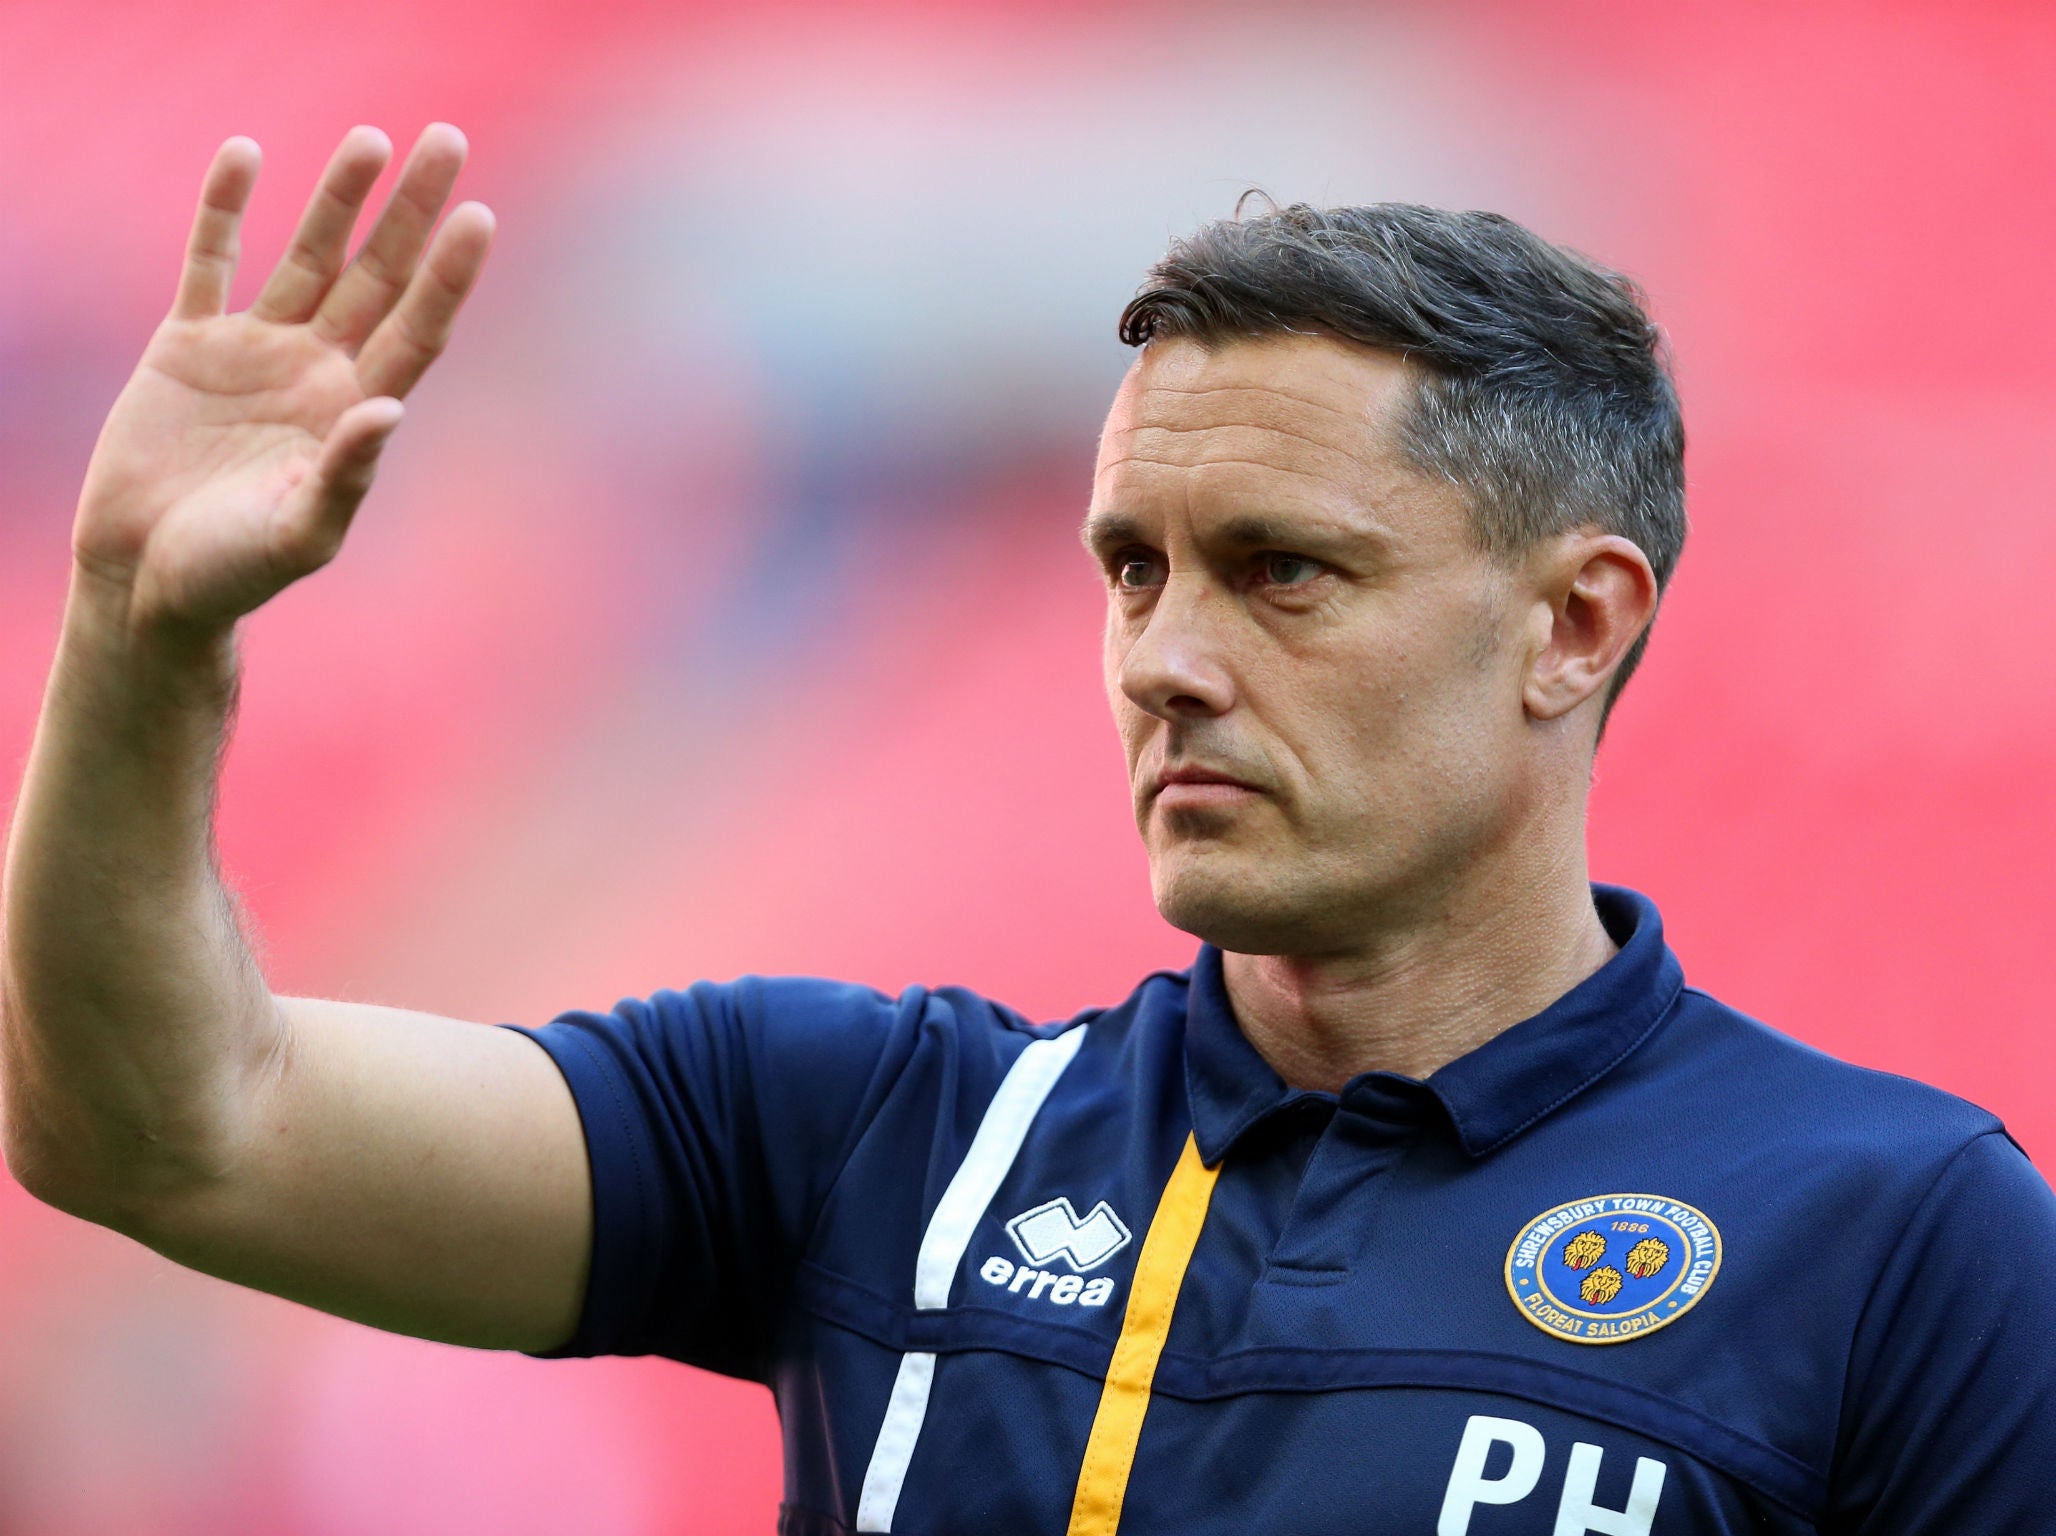 Paul Hurst is the new Ipswich Town manager